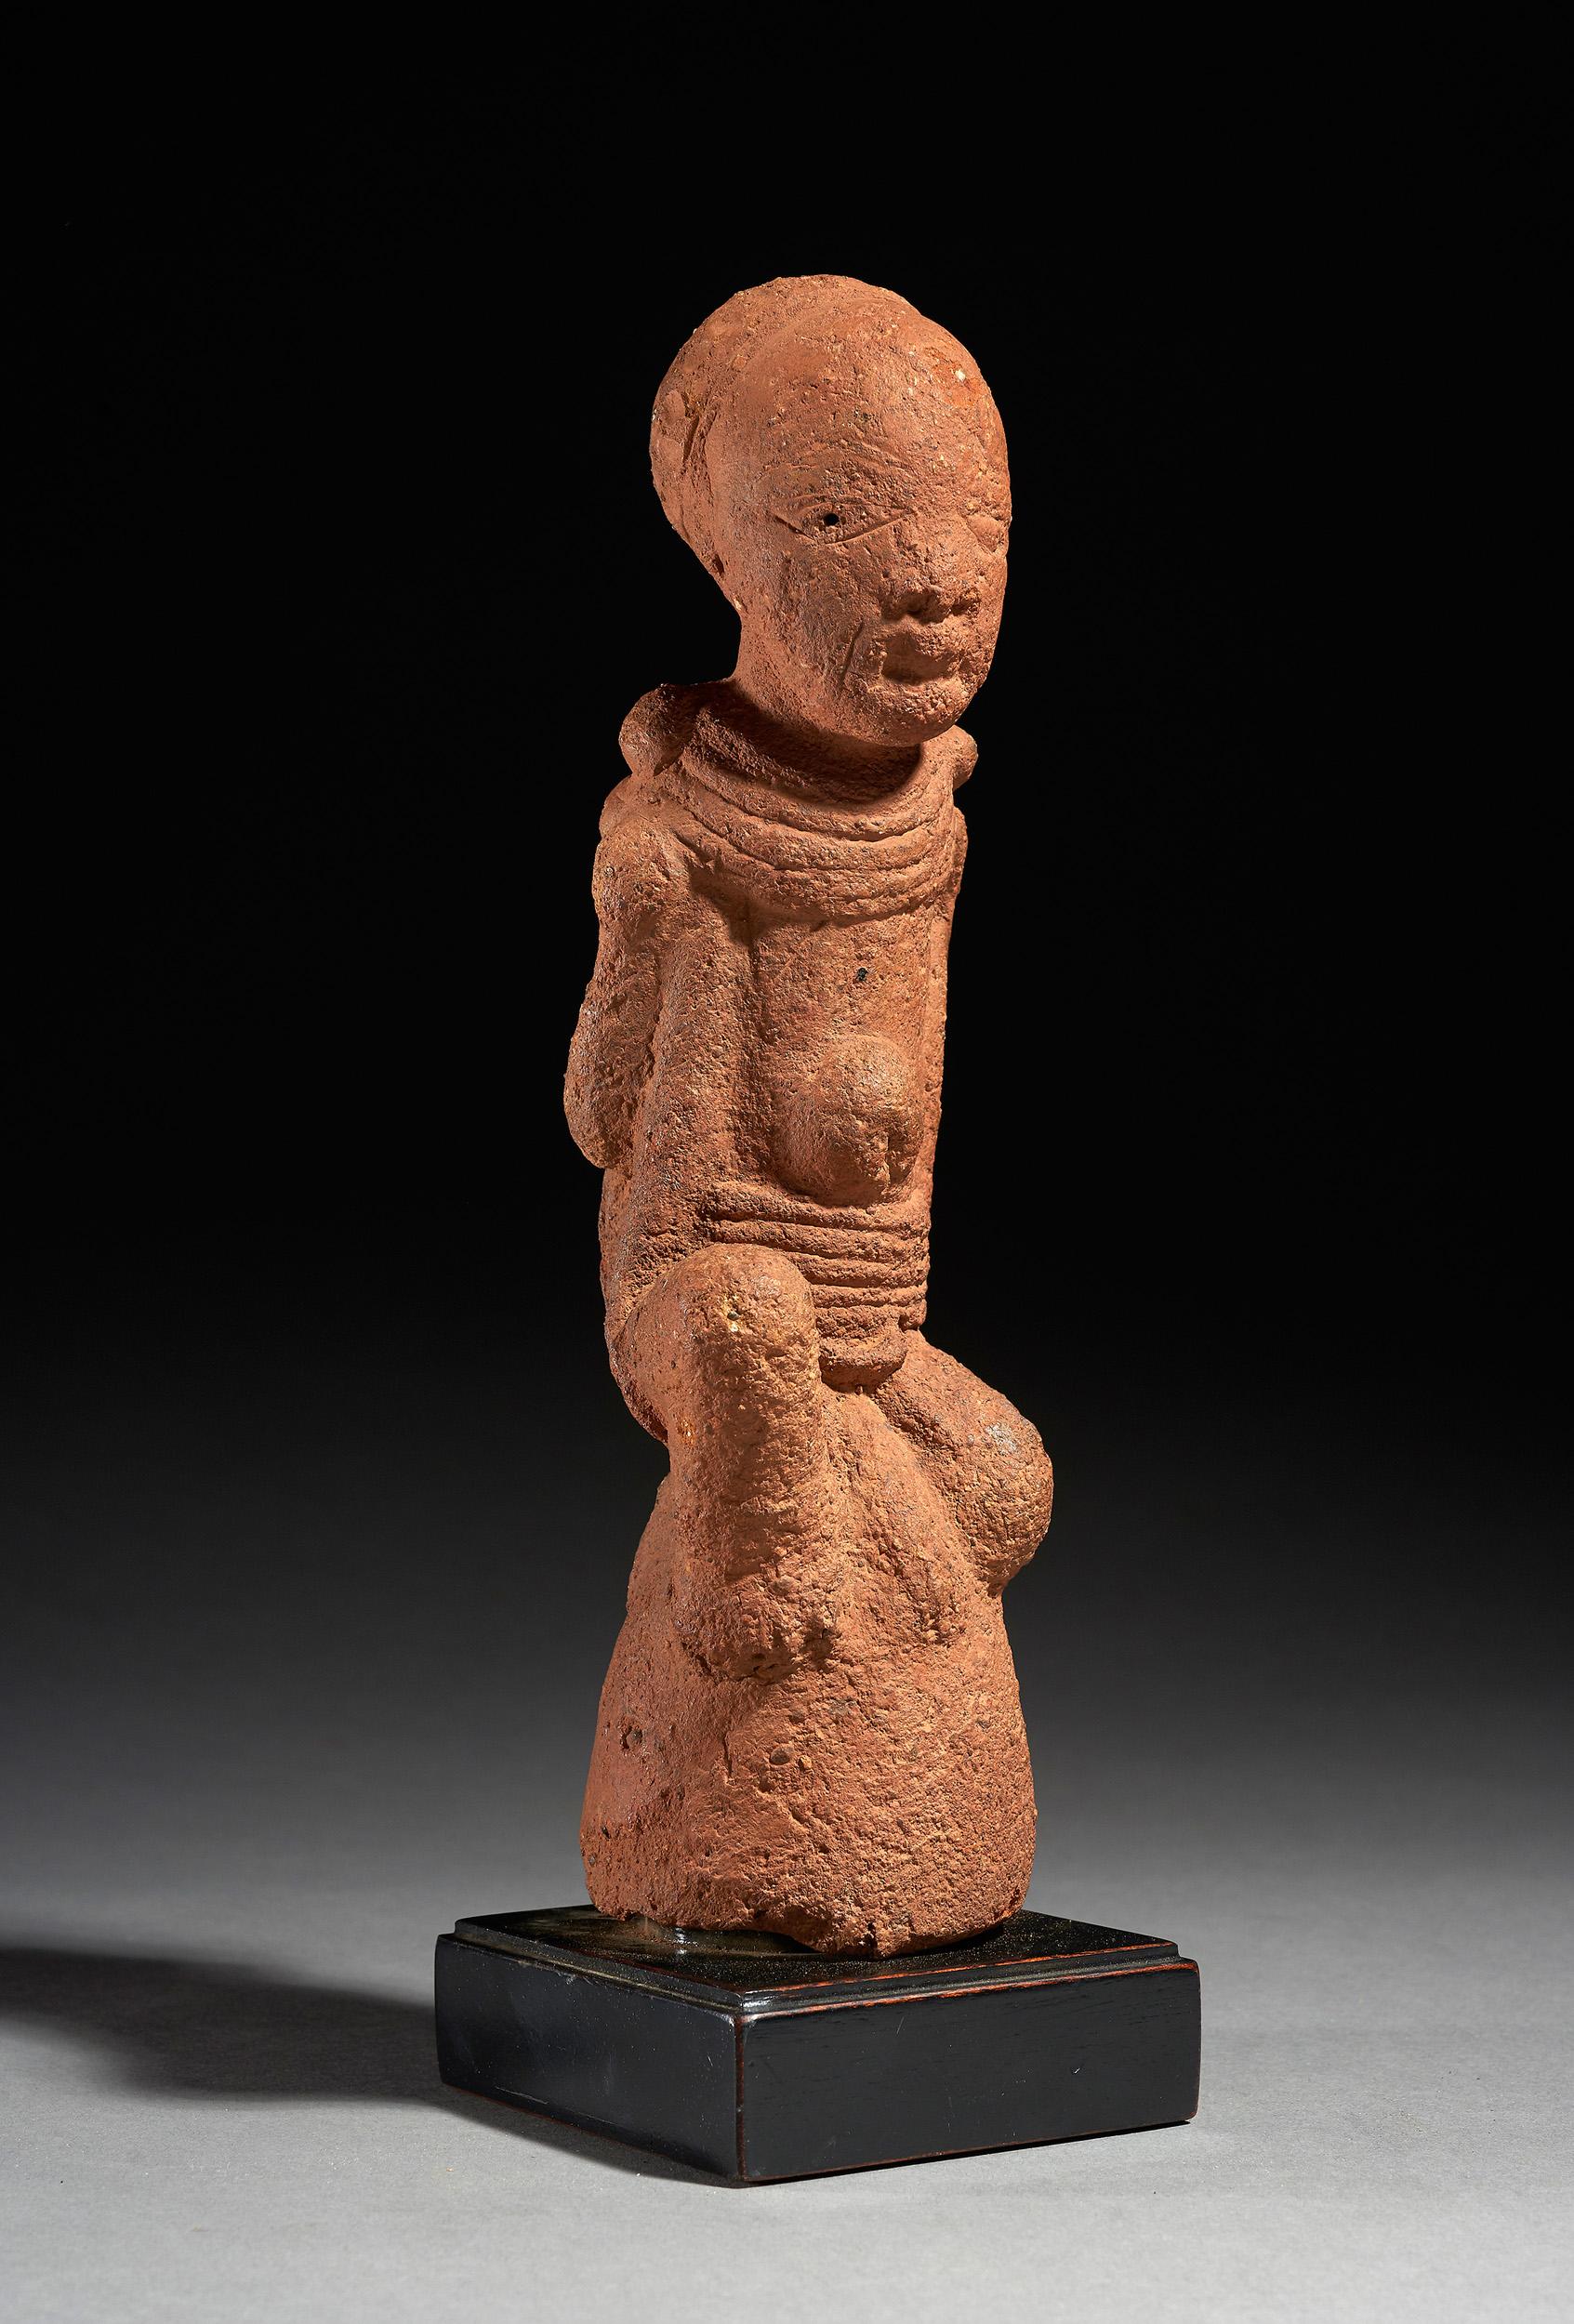 This terracotta figure belongs to the Nok culture, named after a village in Nigeria where the first similar terracottas and several artefacts were found. The village of Nok seems to have been one of the earliest African centres of terracotta figure